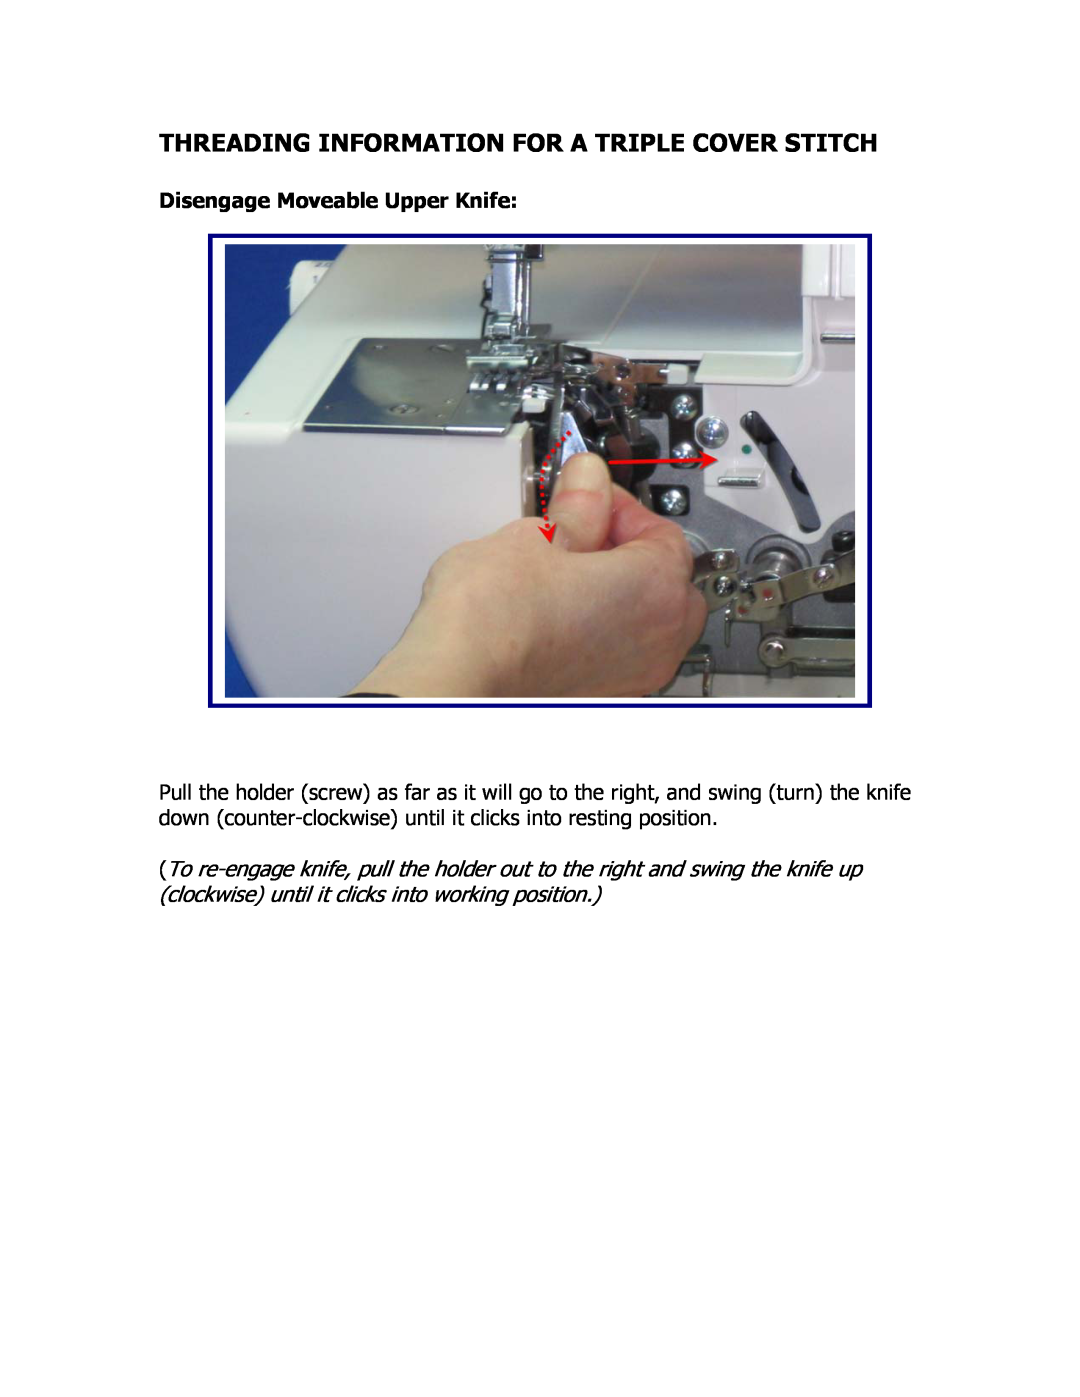 Singer 14T957DC manual Threading Information For A Triple Cover Stitch, Disengage Moveable Upper Knife 